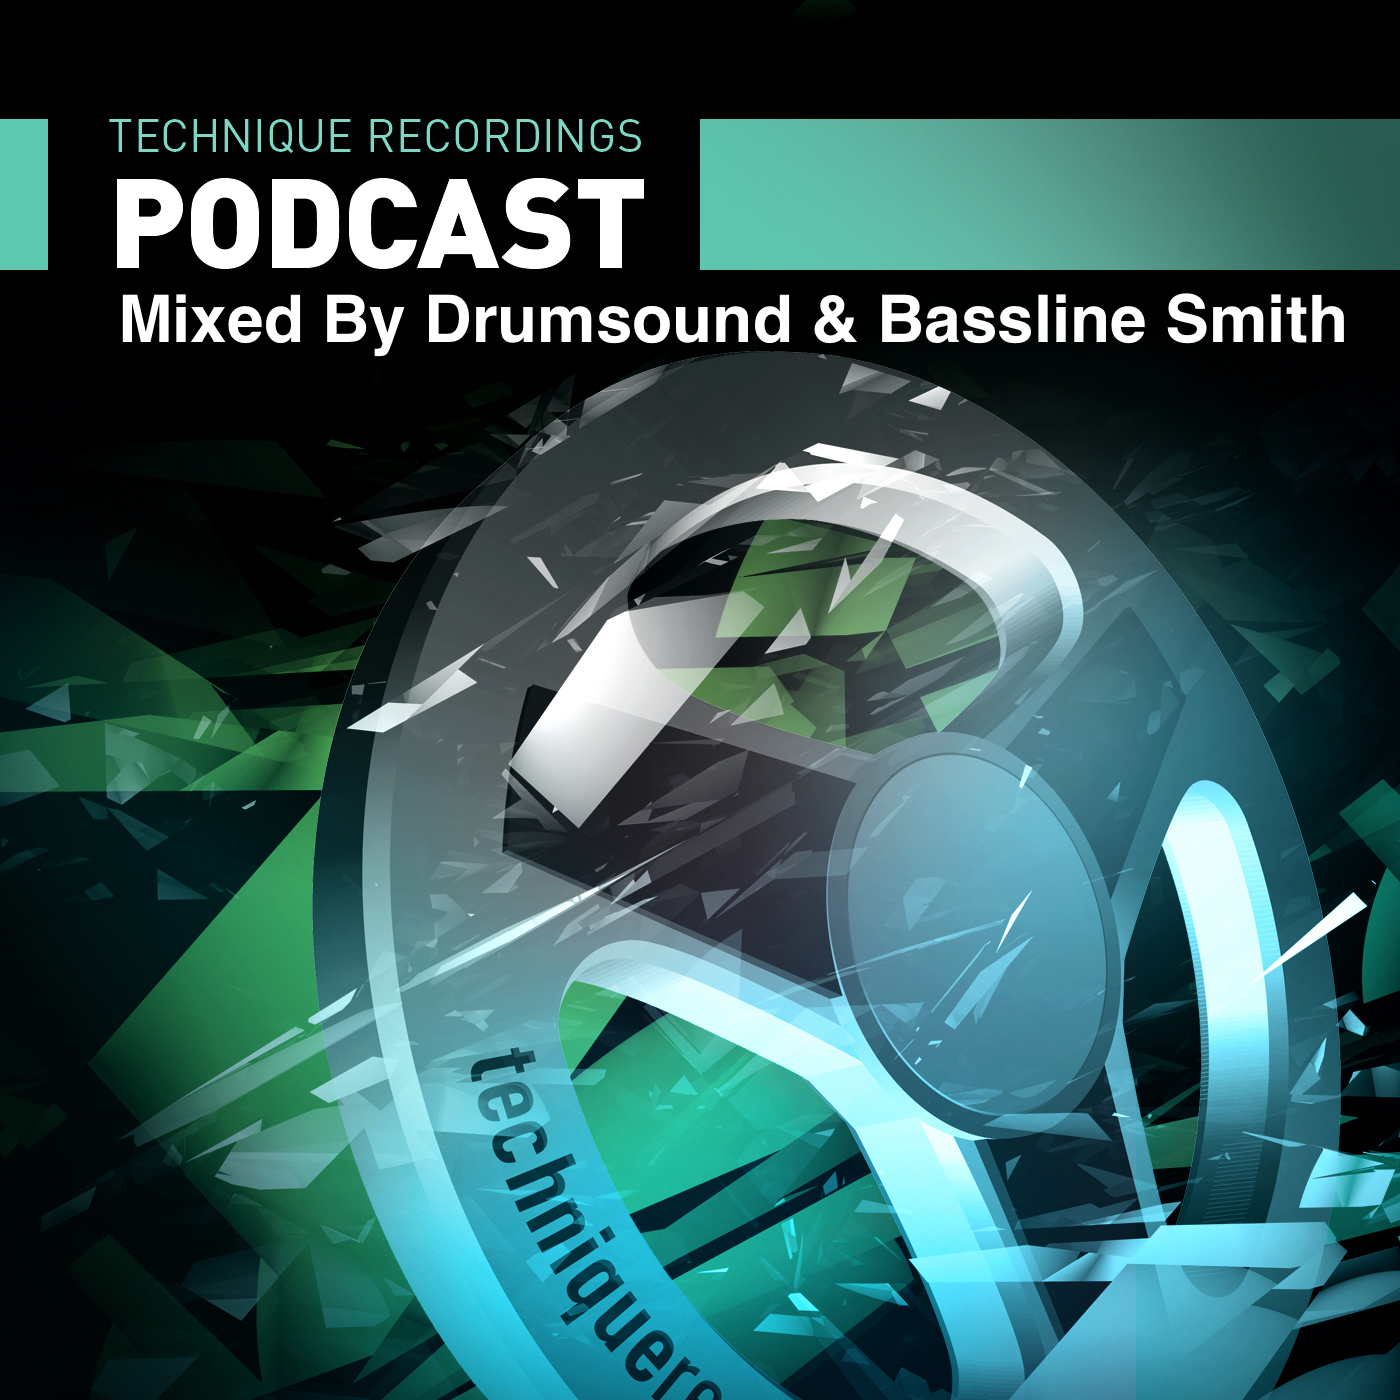 Episode 51 - July 2016 - Technique Podcast Mixed By Drumsound & Bassline Smith